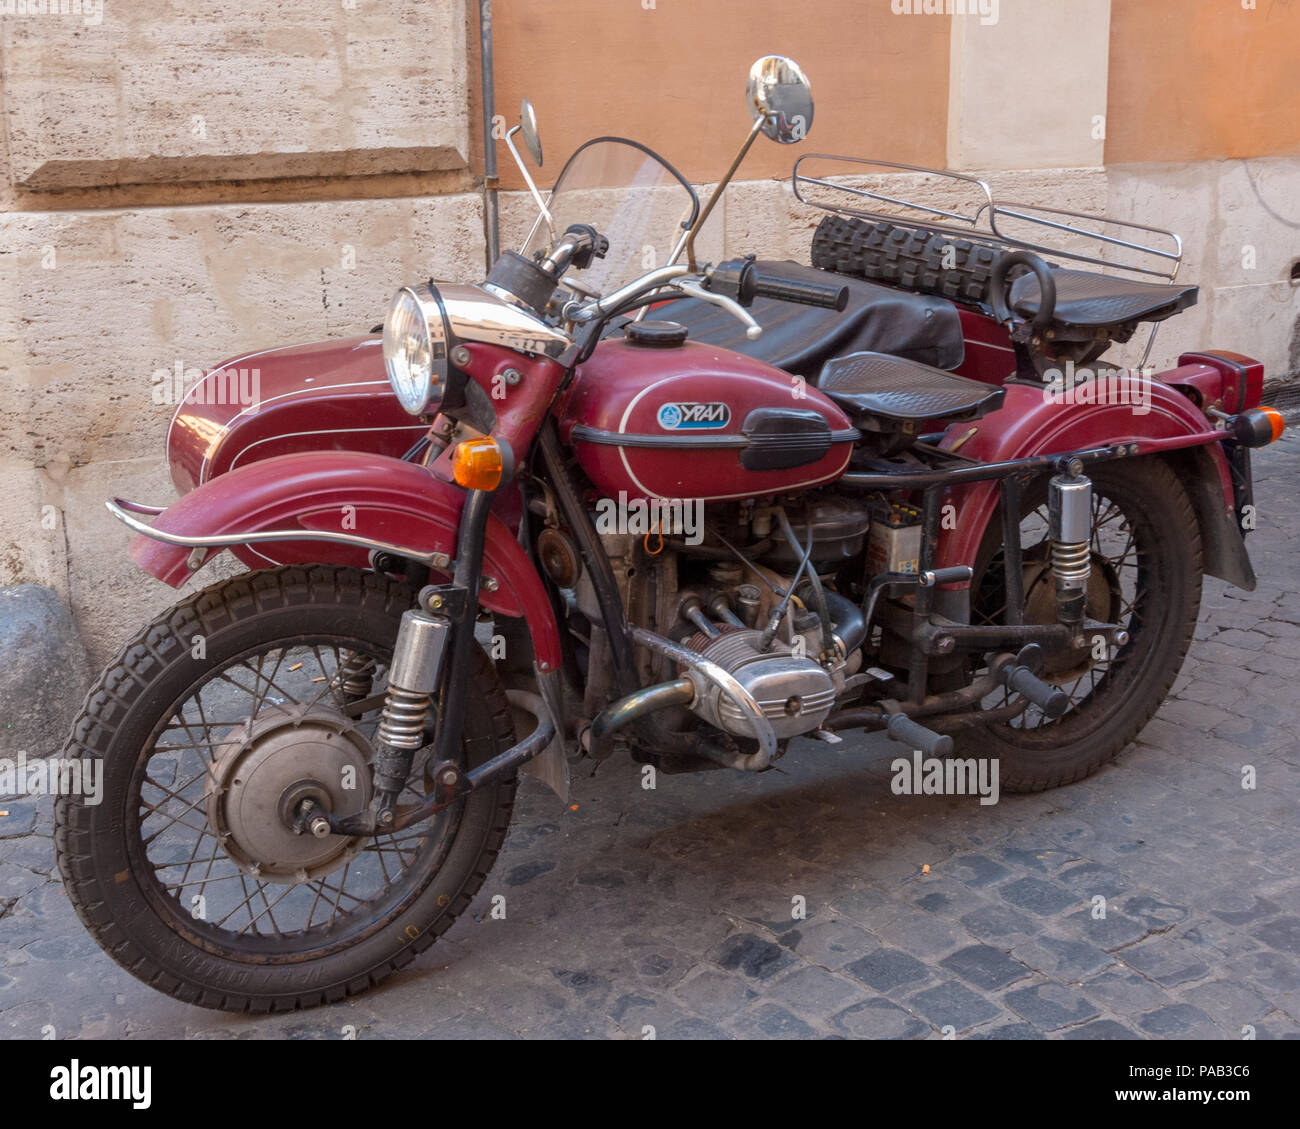 A Ural Ypan Russian motorcycle and side car looking good for its age in a Rome side street. Stock Photo